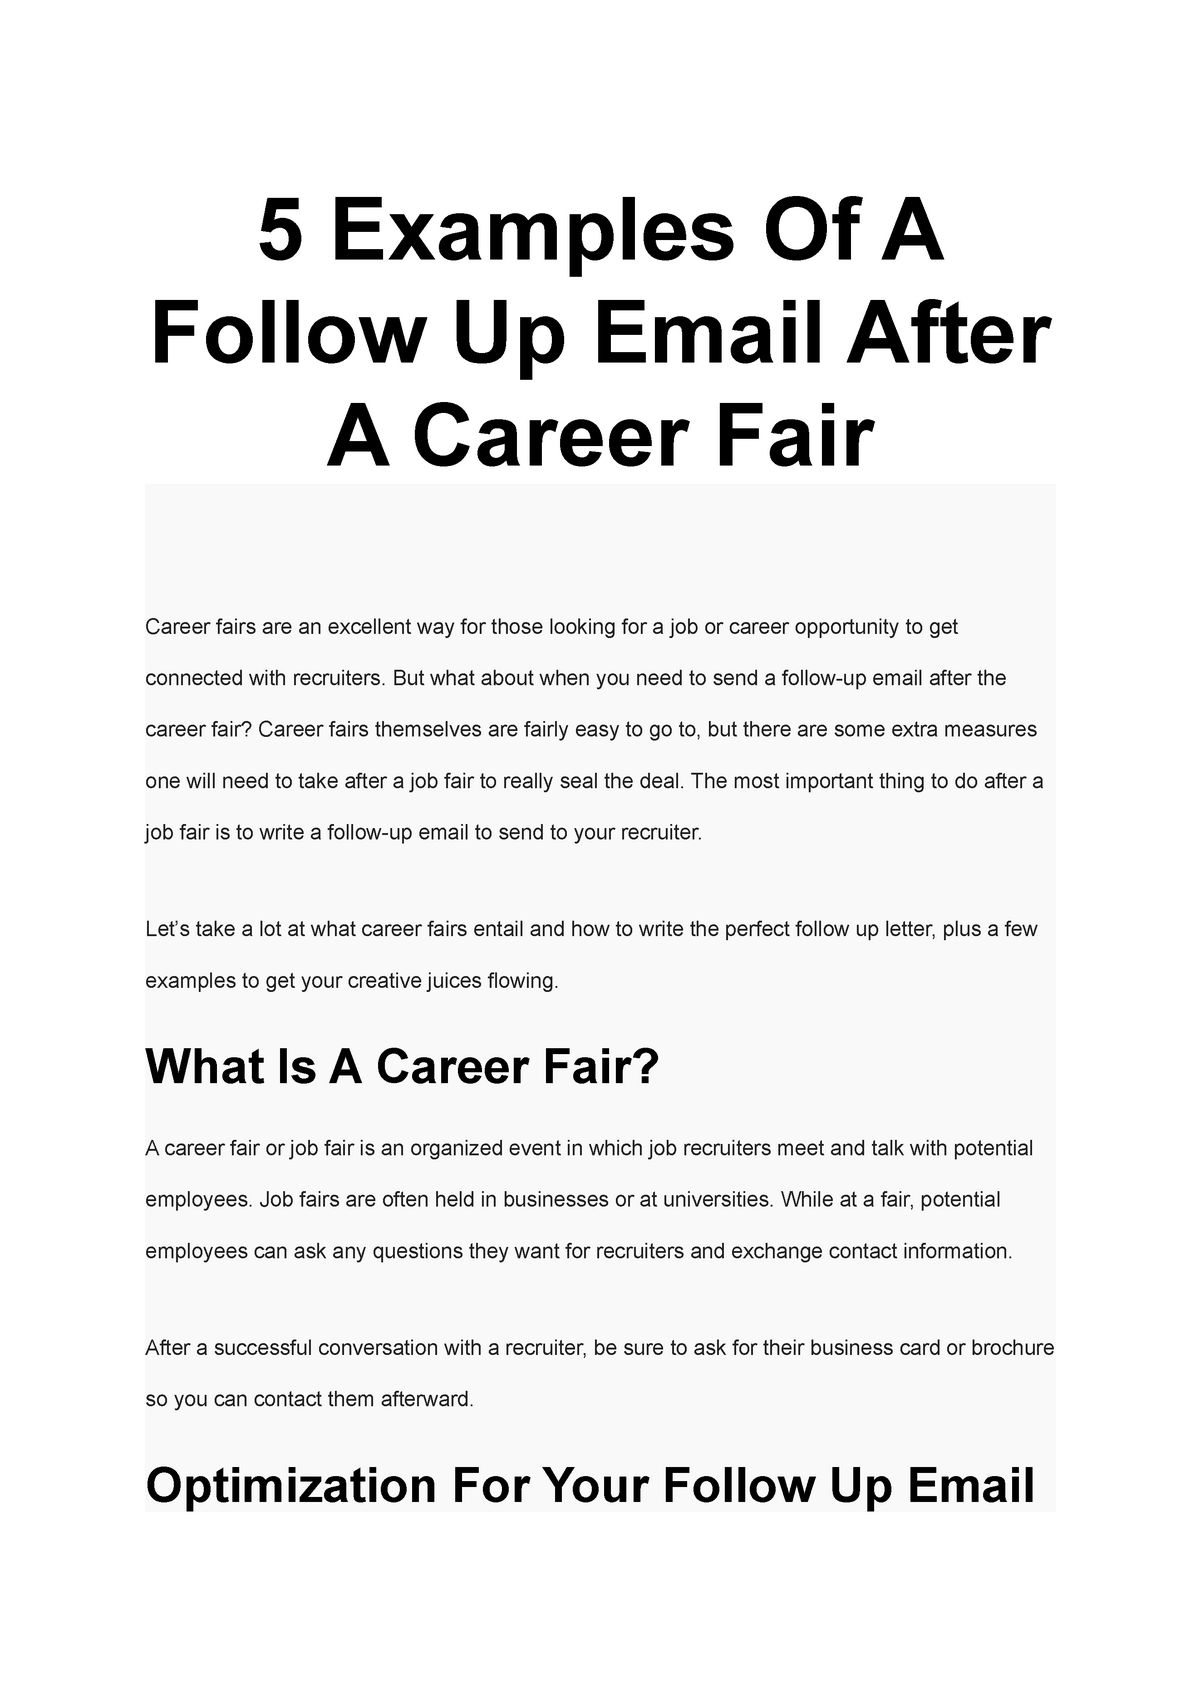 Follow up email samples 1 lecture 5 Examples Of A Follow Up Email